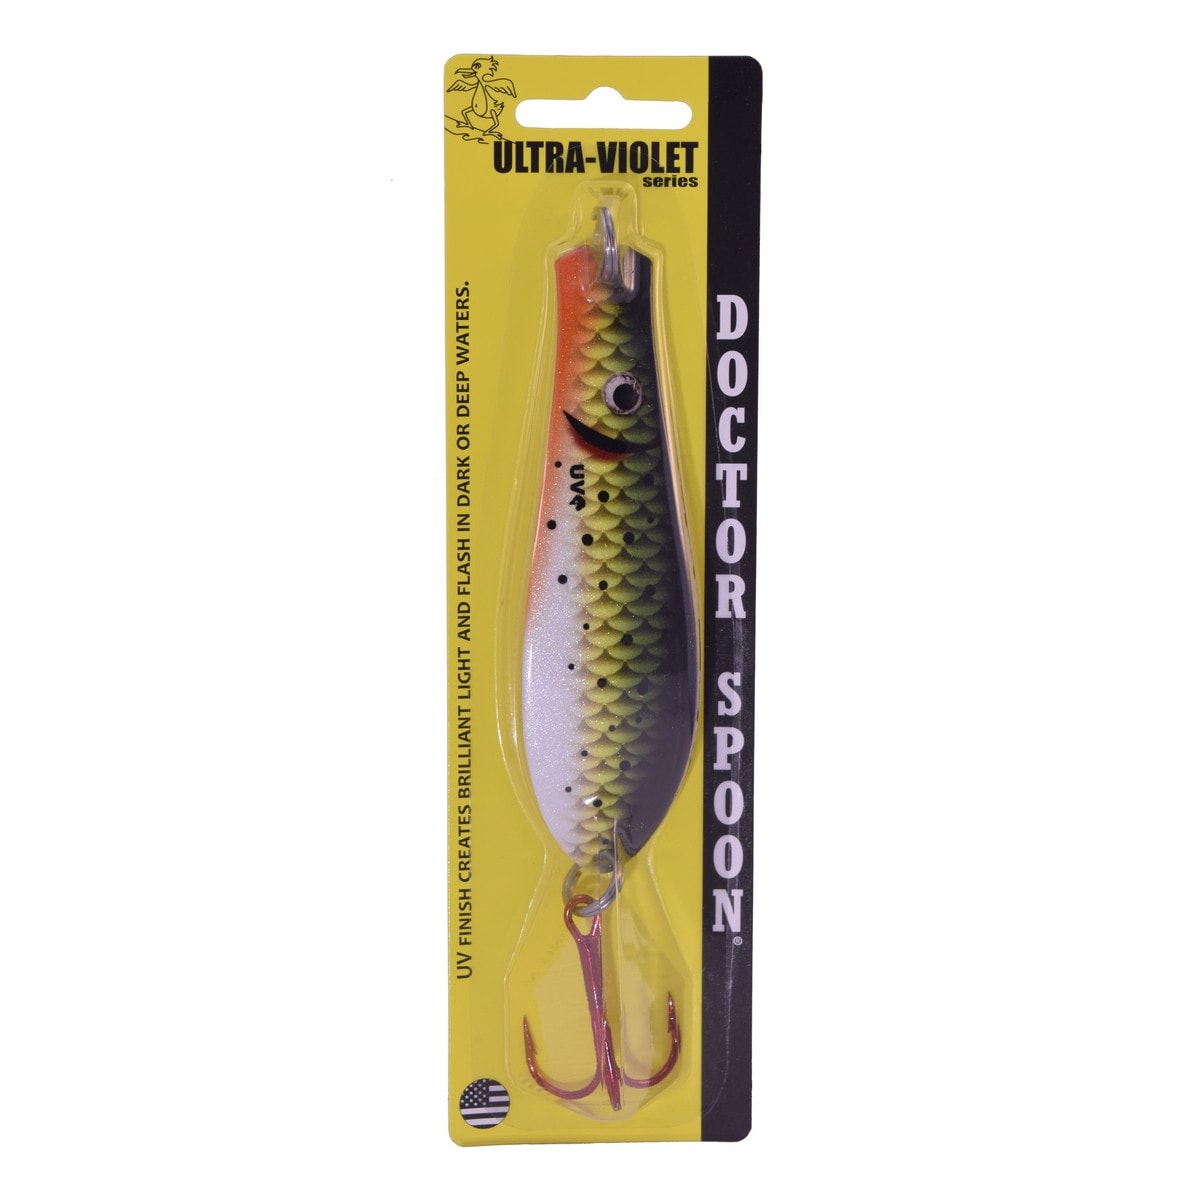 Ultra Violet Doctor Spoon in (540) Mossy - Yellow Bird Fishing